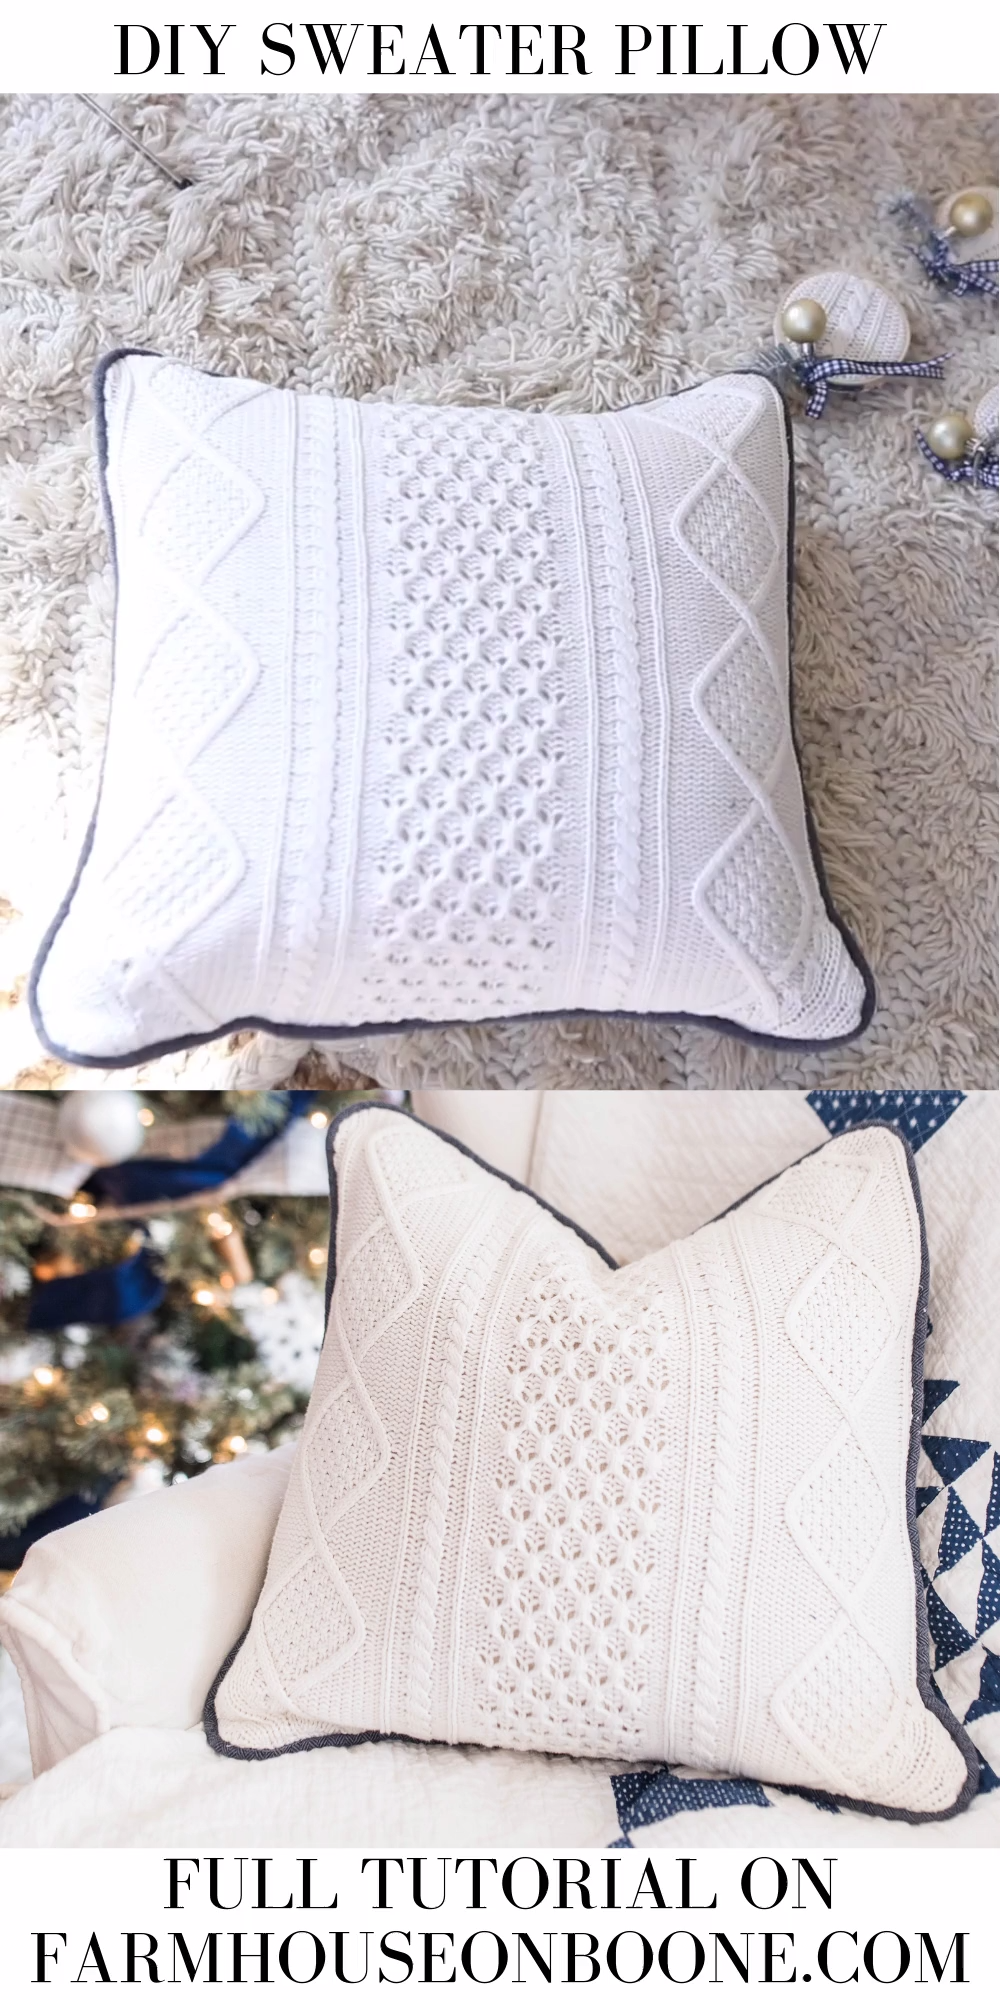 How To Make A Pillow From A Sweater - How To Make A Pillow From A Sweater -   beauty DIY sewing